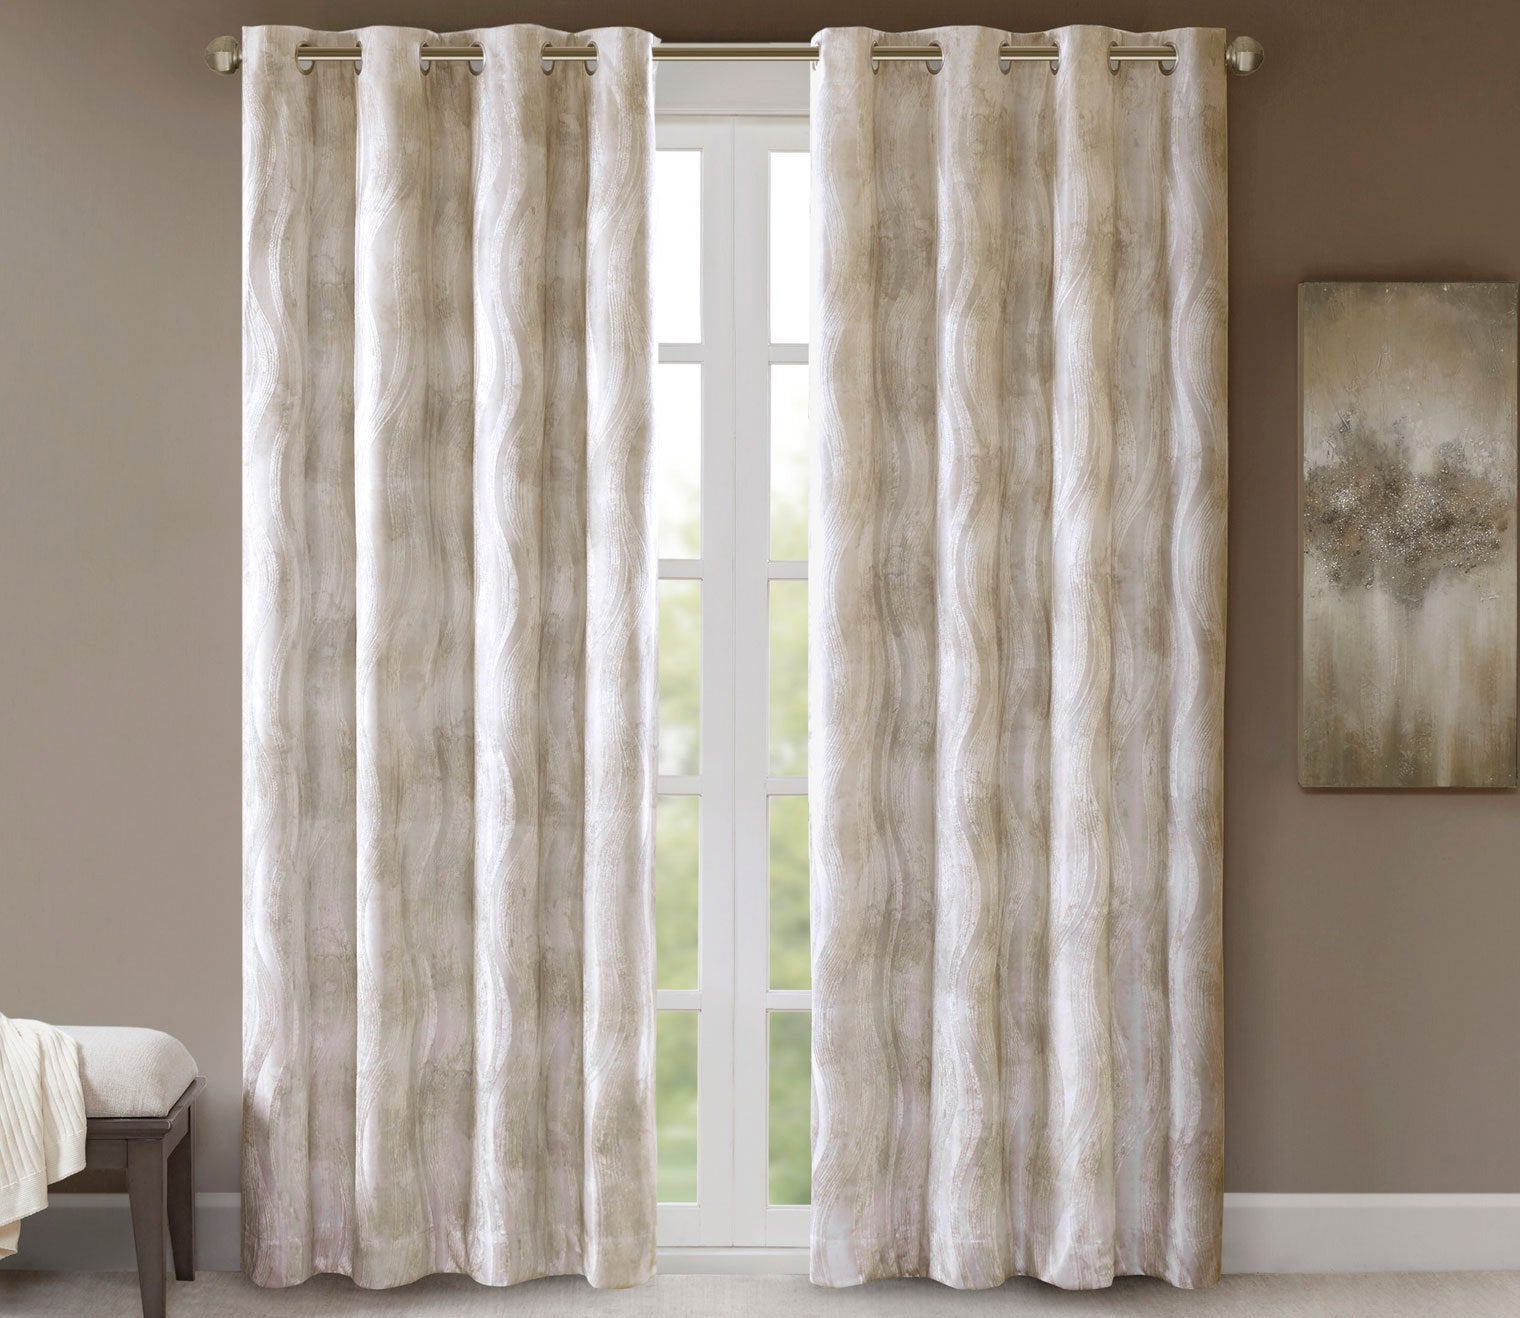 Victorio Printed Jacquard Total Blackout Grommet Top Curtain Panel by SunSmart